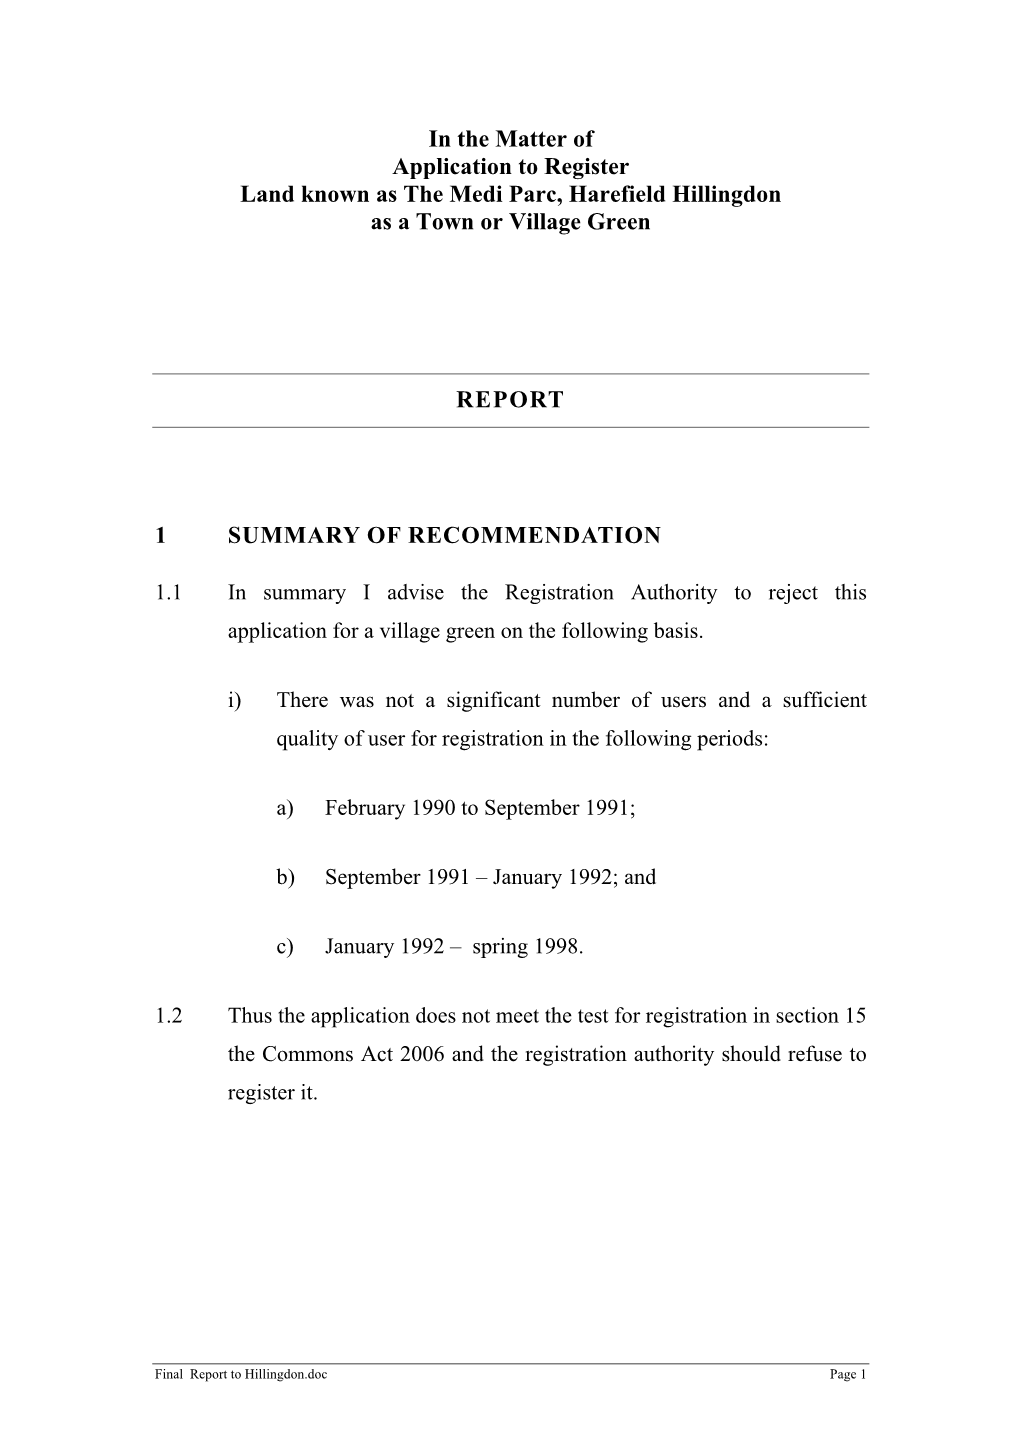 In the Matter of Application to Register Land Known As the Medi Parc, Harefield Hillingdon As a Town Or Village Green